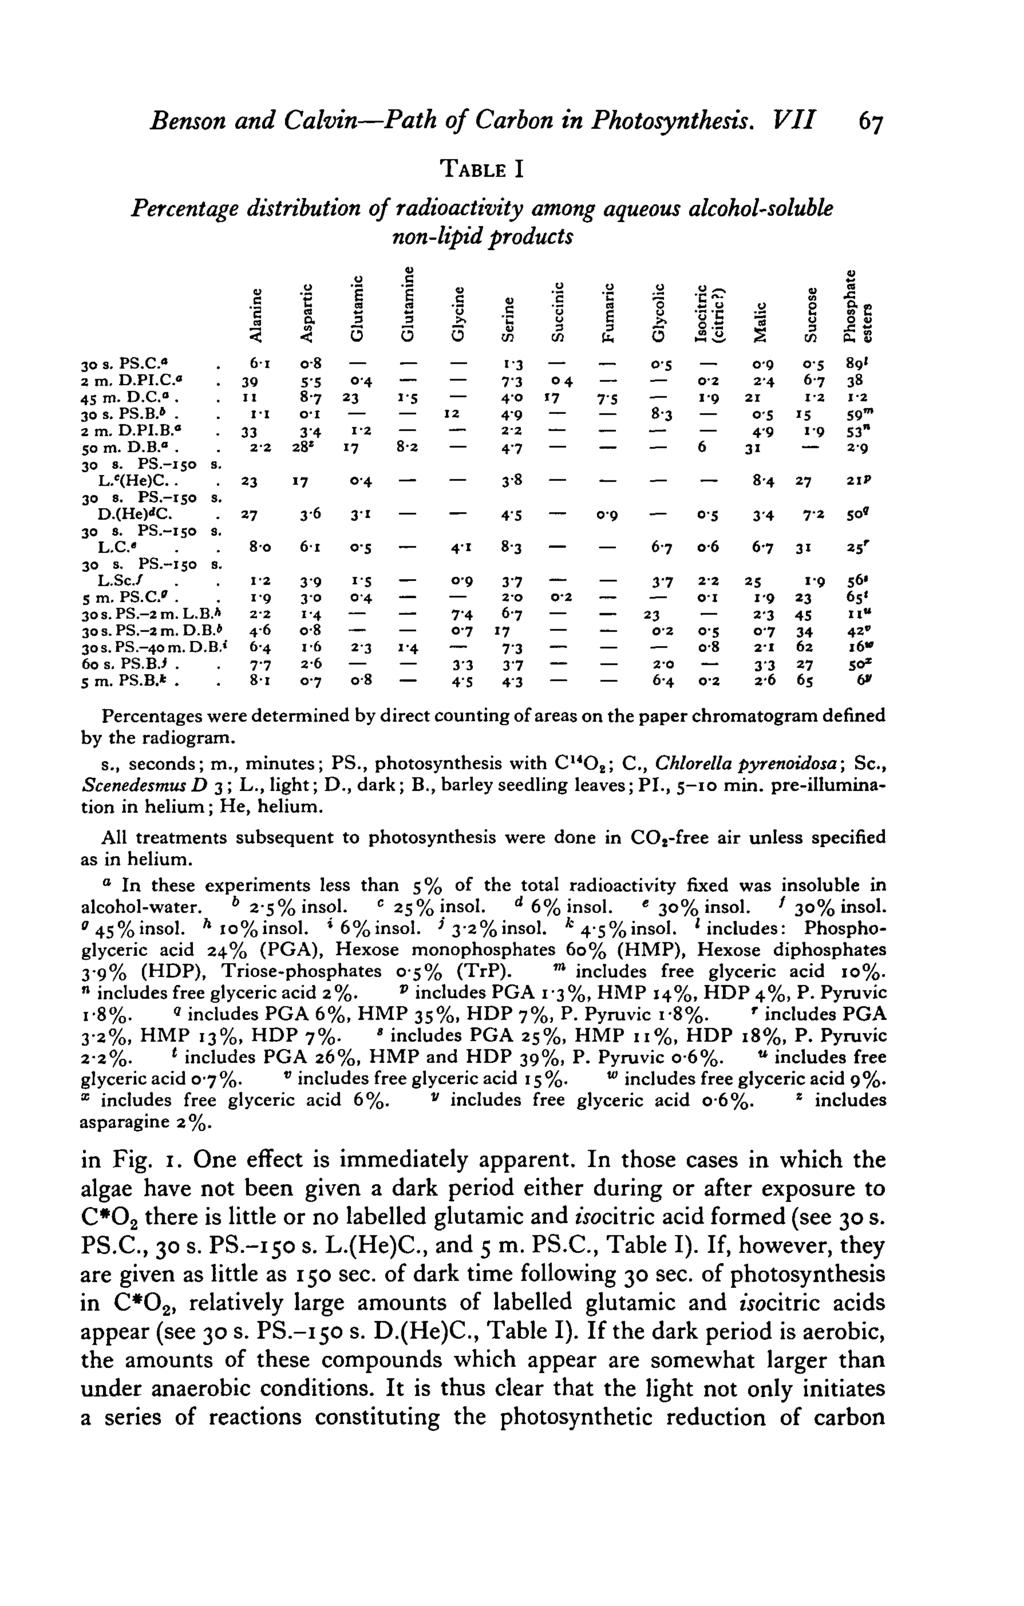 Benson and CalvinPath of Carbon in Photosynthesis. VII 67 TABLE I Percentage distribution of radioactivity among aqueous alcohol-soluble non-lipid products Glycine p 5 s : S a 3 : < < O t 30 s. PS.C.".